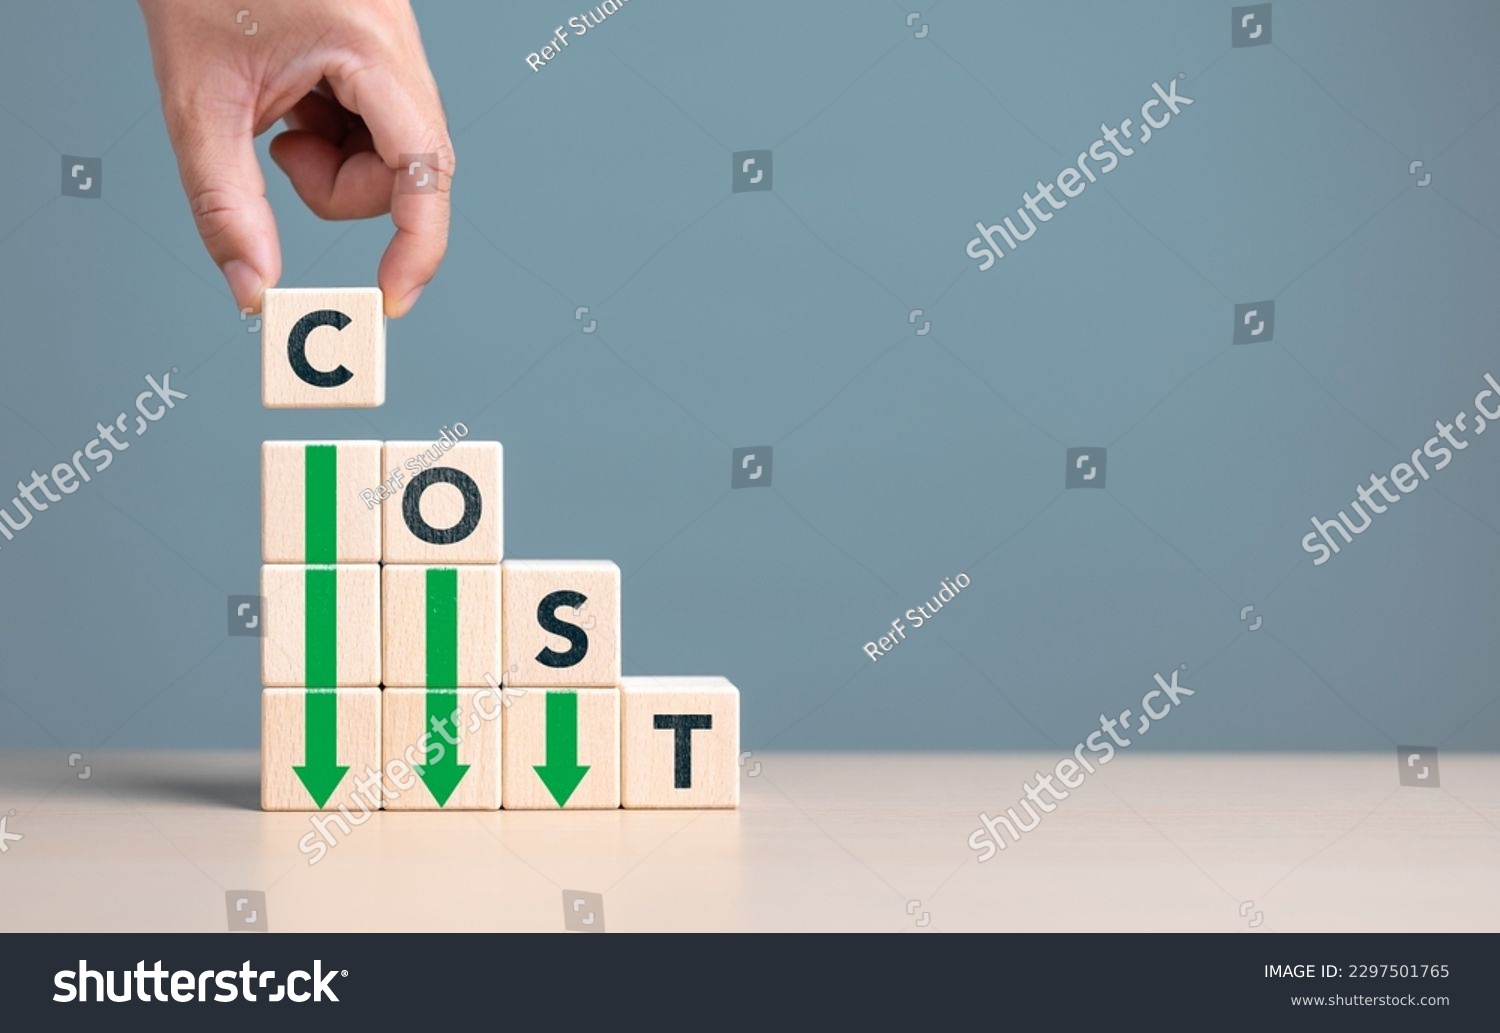 Lean or Cost reduction concept. Optimize manufacturing management. Decreasing company expense to maximize profits. Hand puts wooden cube with words cost and green down arrows. Business improvement. #2297501765